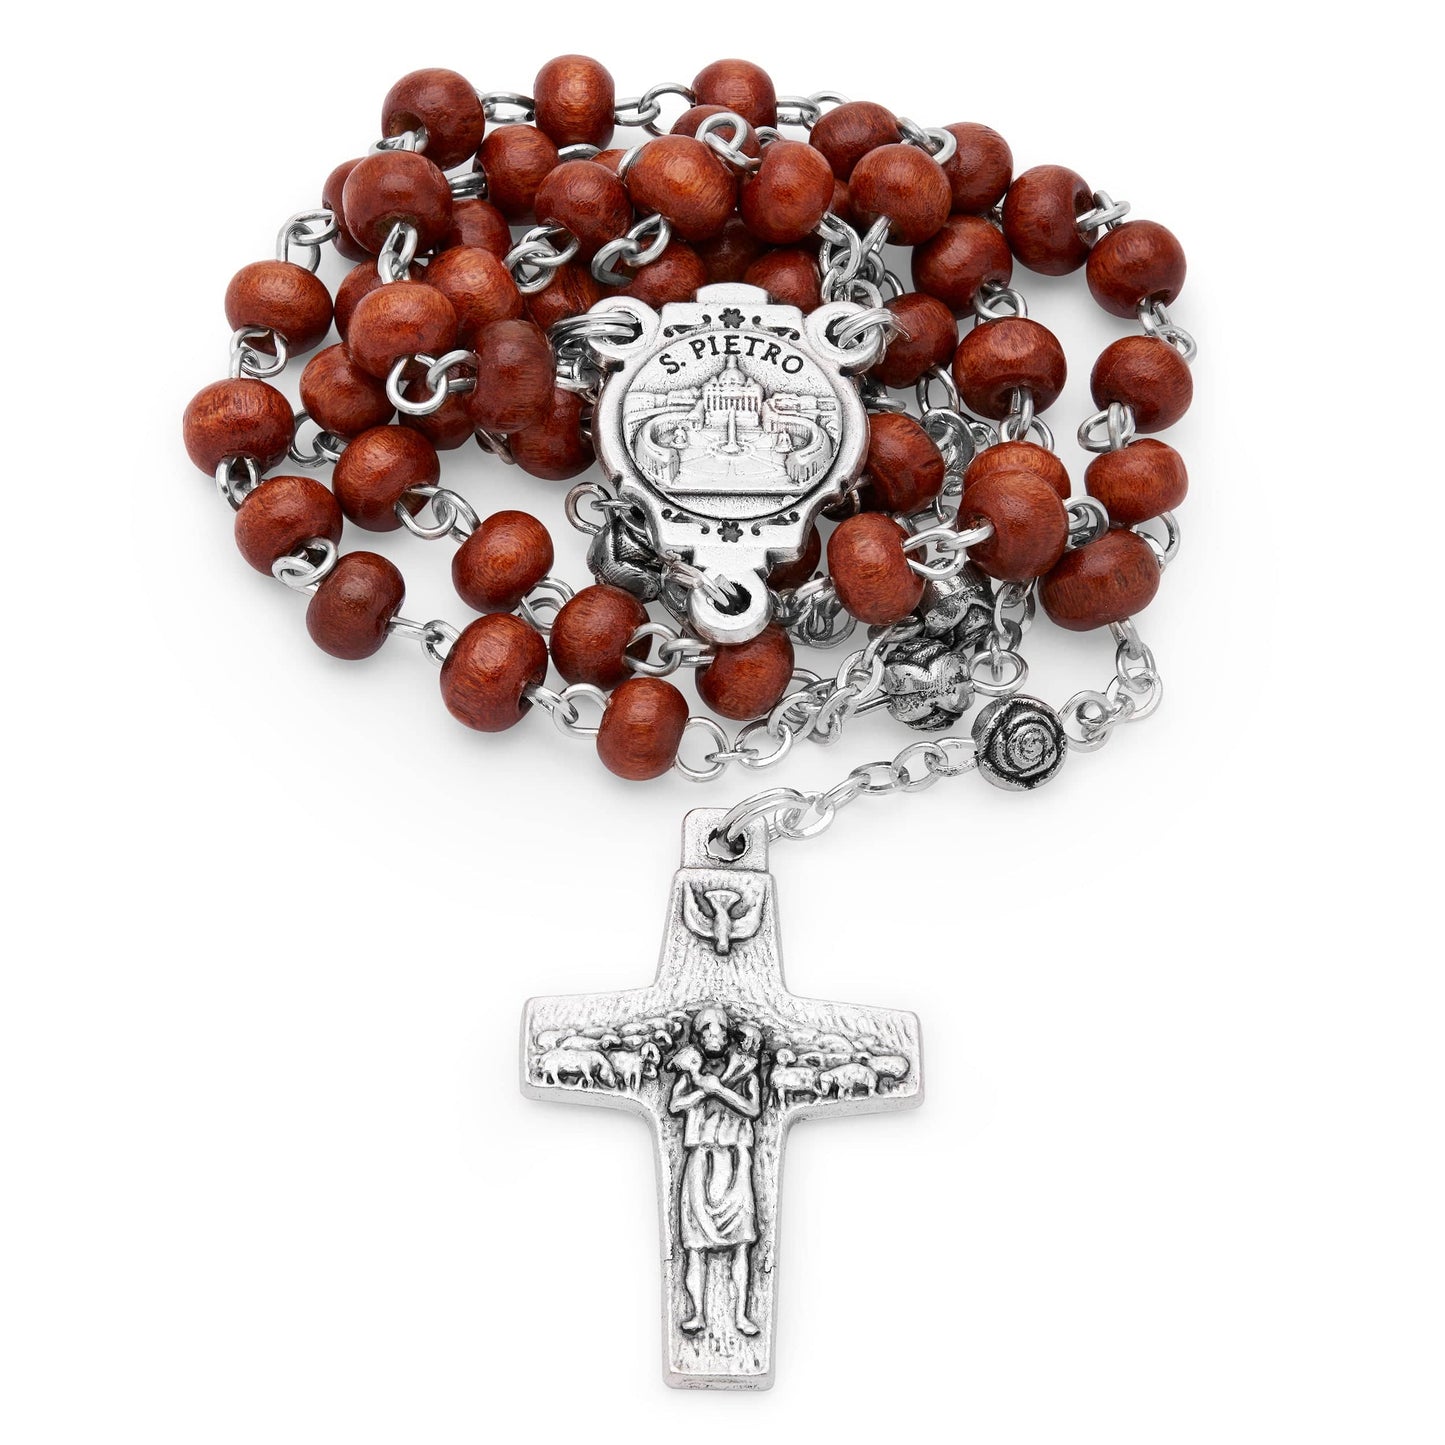 MONDO CATTOLICO Prayer Beads 38 cm (15 in) / 4 mm (0.15 in) Olive Wood Case and Rosary of Pope Francis